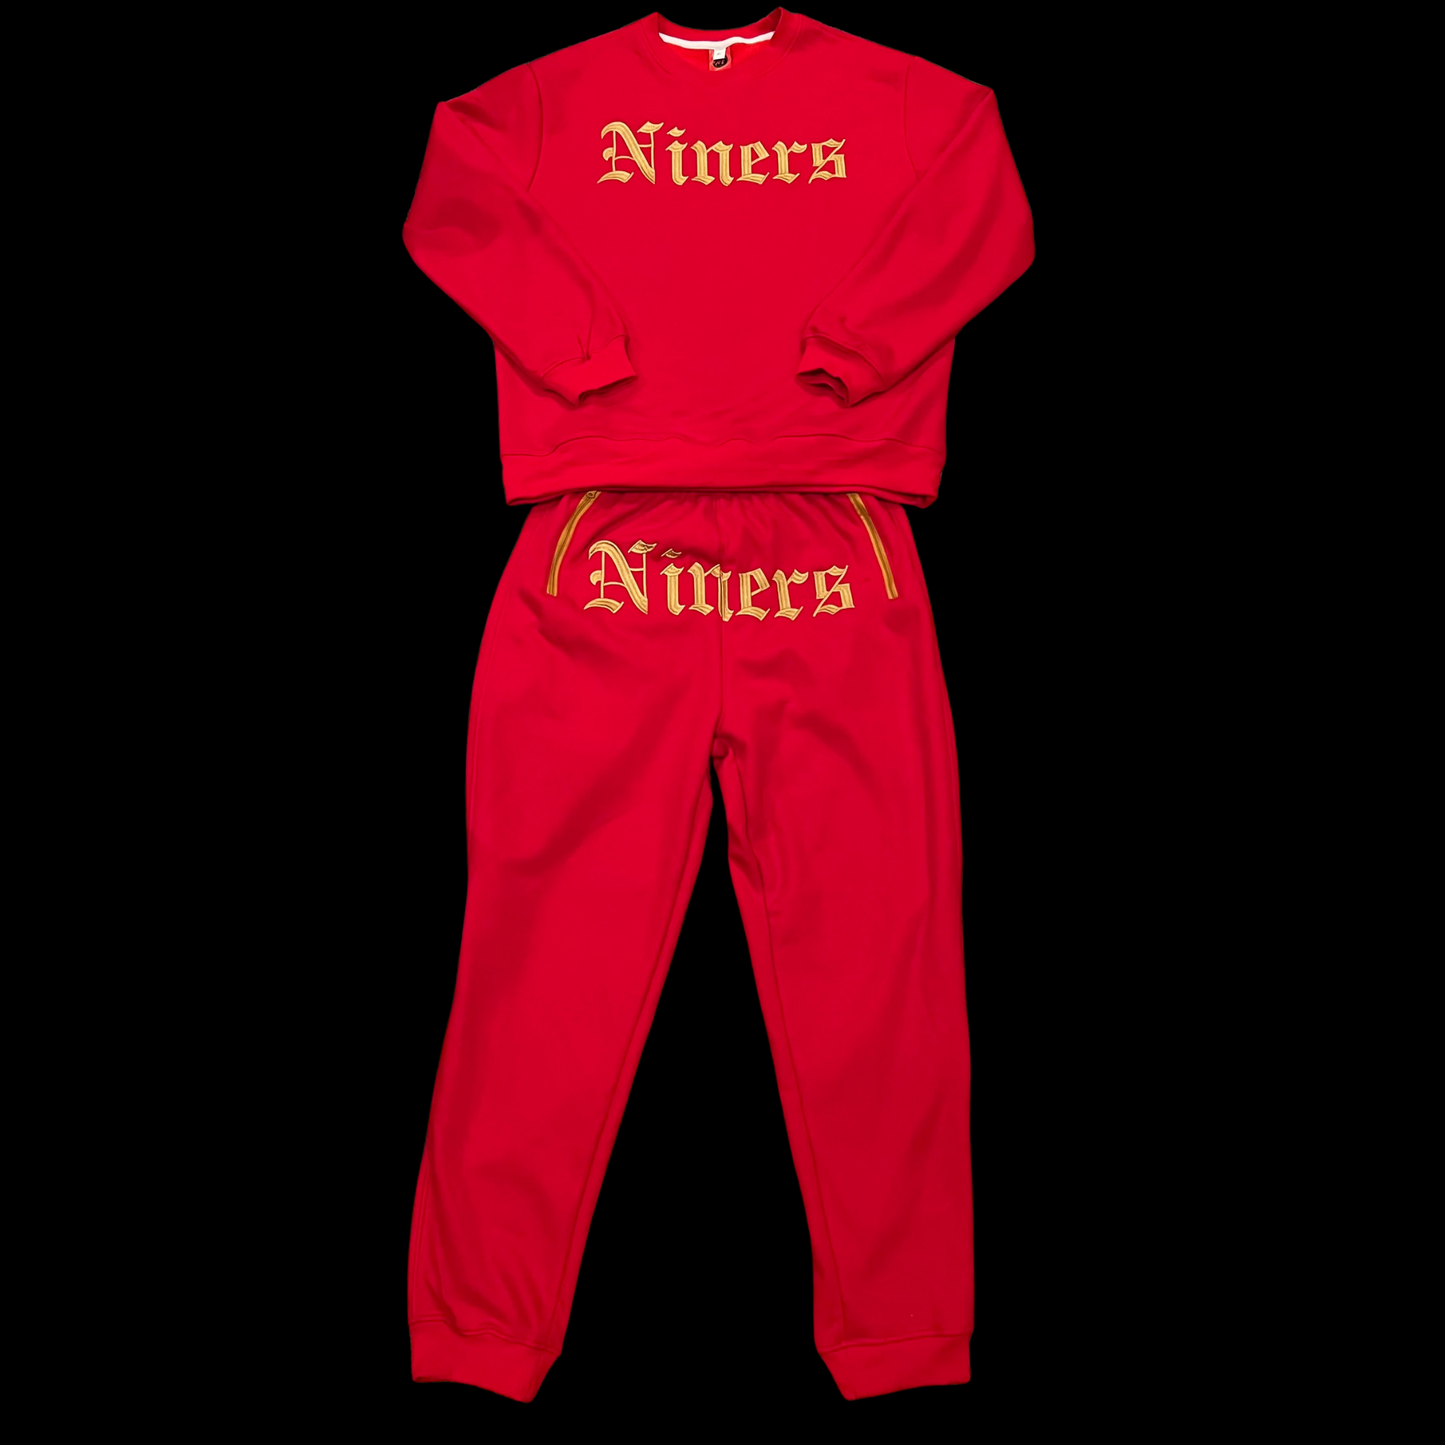 NINERS Fully Embroidered Sweatsuit toddler size